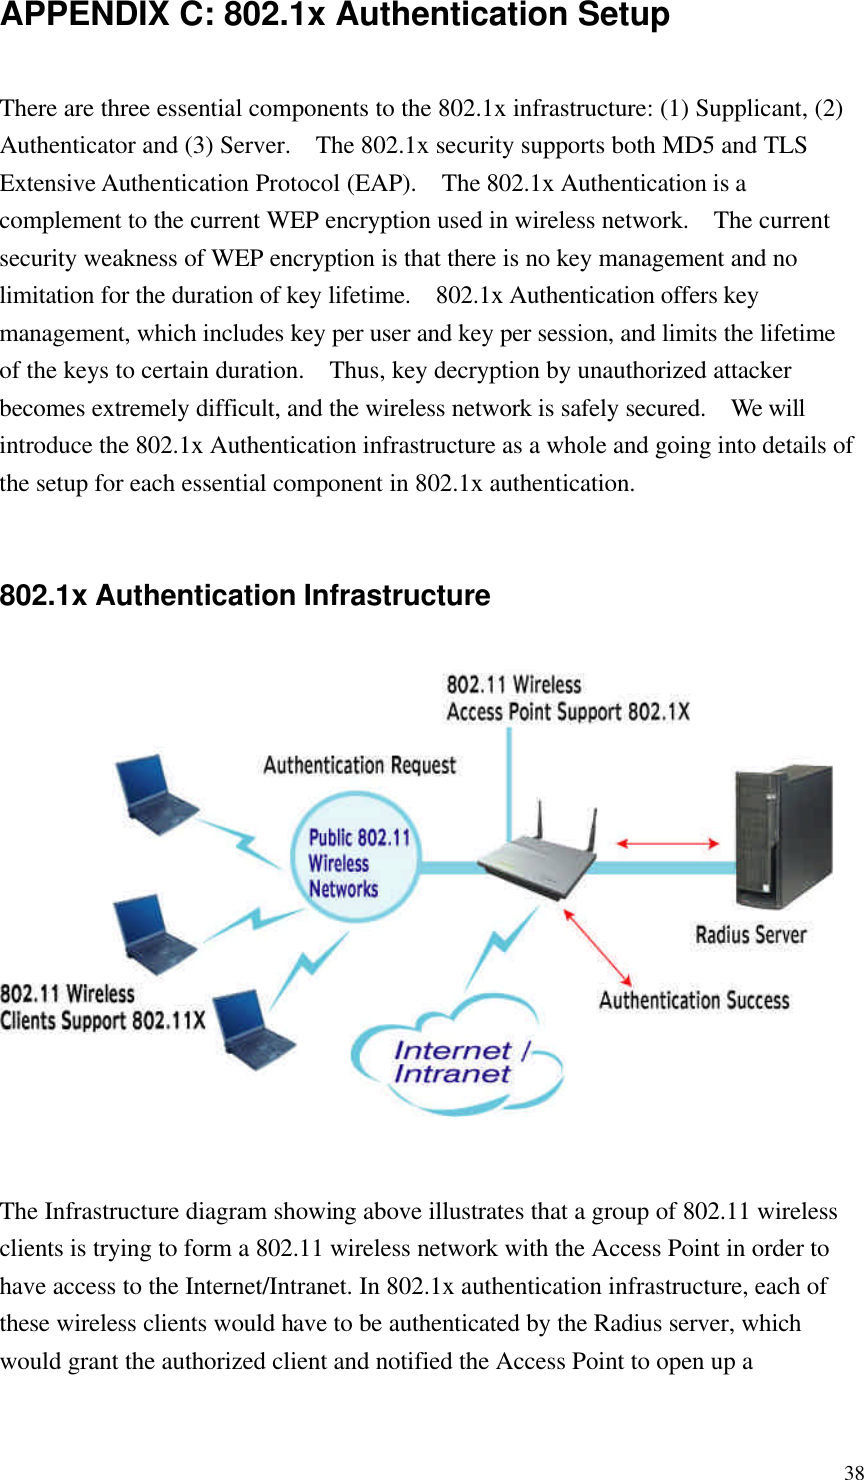  38APPENDIX C: 802.1x Authentication Setup There are three essential components to the 802.1x infrastructure: (1) Supplicant, (2) Authenticator and (3) Server.  The 802.1x security supports both MD5 and TLS Extensive Authentication Protocol (EAP).  The 802.1x Authentication is a complement to the current WEP encryption used in wireless network.  The current security weakness of WEP encryption is that there is no key management and no limitation for the duration of key lifetime.  802.1x Authentication offers key management, which includes key per user and key per session, and limits the lifetime of the keys to certain duration.  Thus, key decryption by unauthorized attacker becomes extremely difficult, and the wireless network is safely secured.  We will introduce the 802.1x Authentication infrastructure as a whole and going into details of the setup for each essential component in 802.1x authentication.  802.1x Authentication Infrastructure   The Infrastructure diagram showing above illustrates that a group of 802.11 wireless clients is trying to form a 802.11 wireless network with the Access Point in order to have access to the Internet/Intranet. In 802.1x authentication infrastructure, each of these wireless clients would have to be authenticated by the Radius server, which would grant the authorized client and notified the Access Point to open up a 